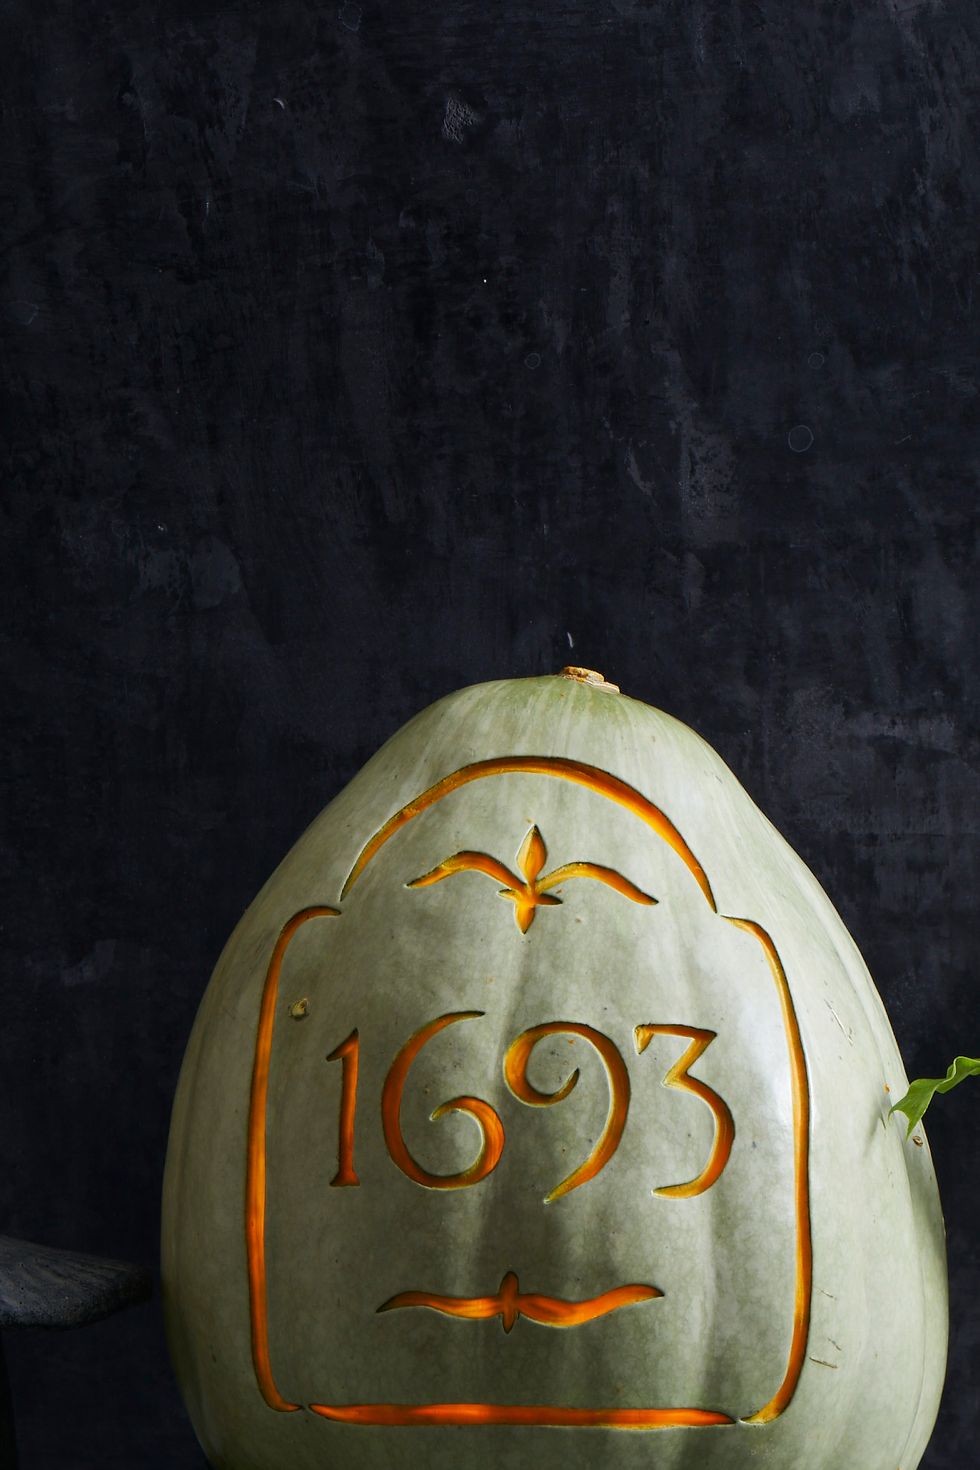 pumpkin carving ideas, white pumpkin carved with numbers to resemble a tombstone